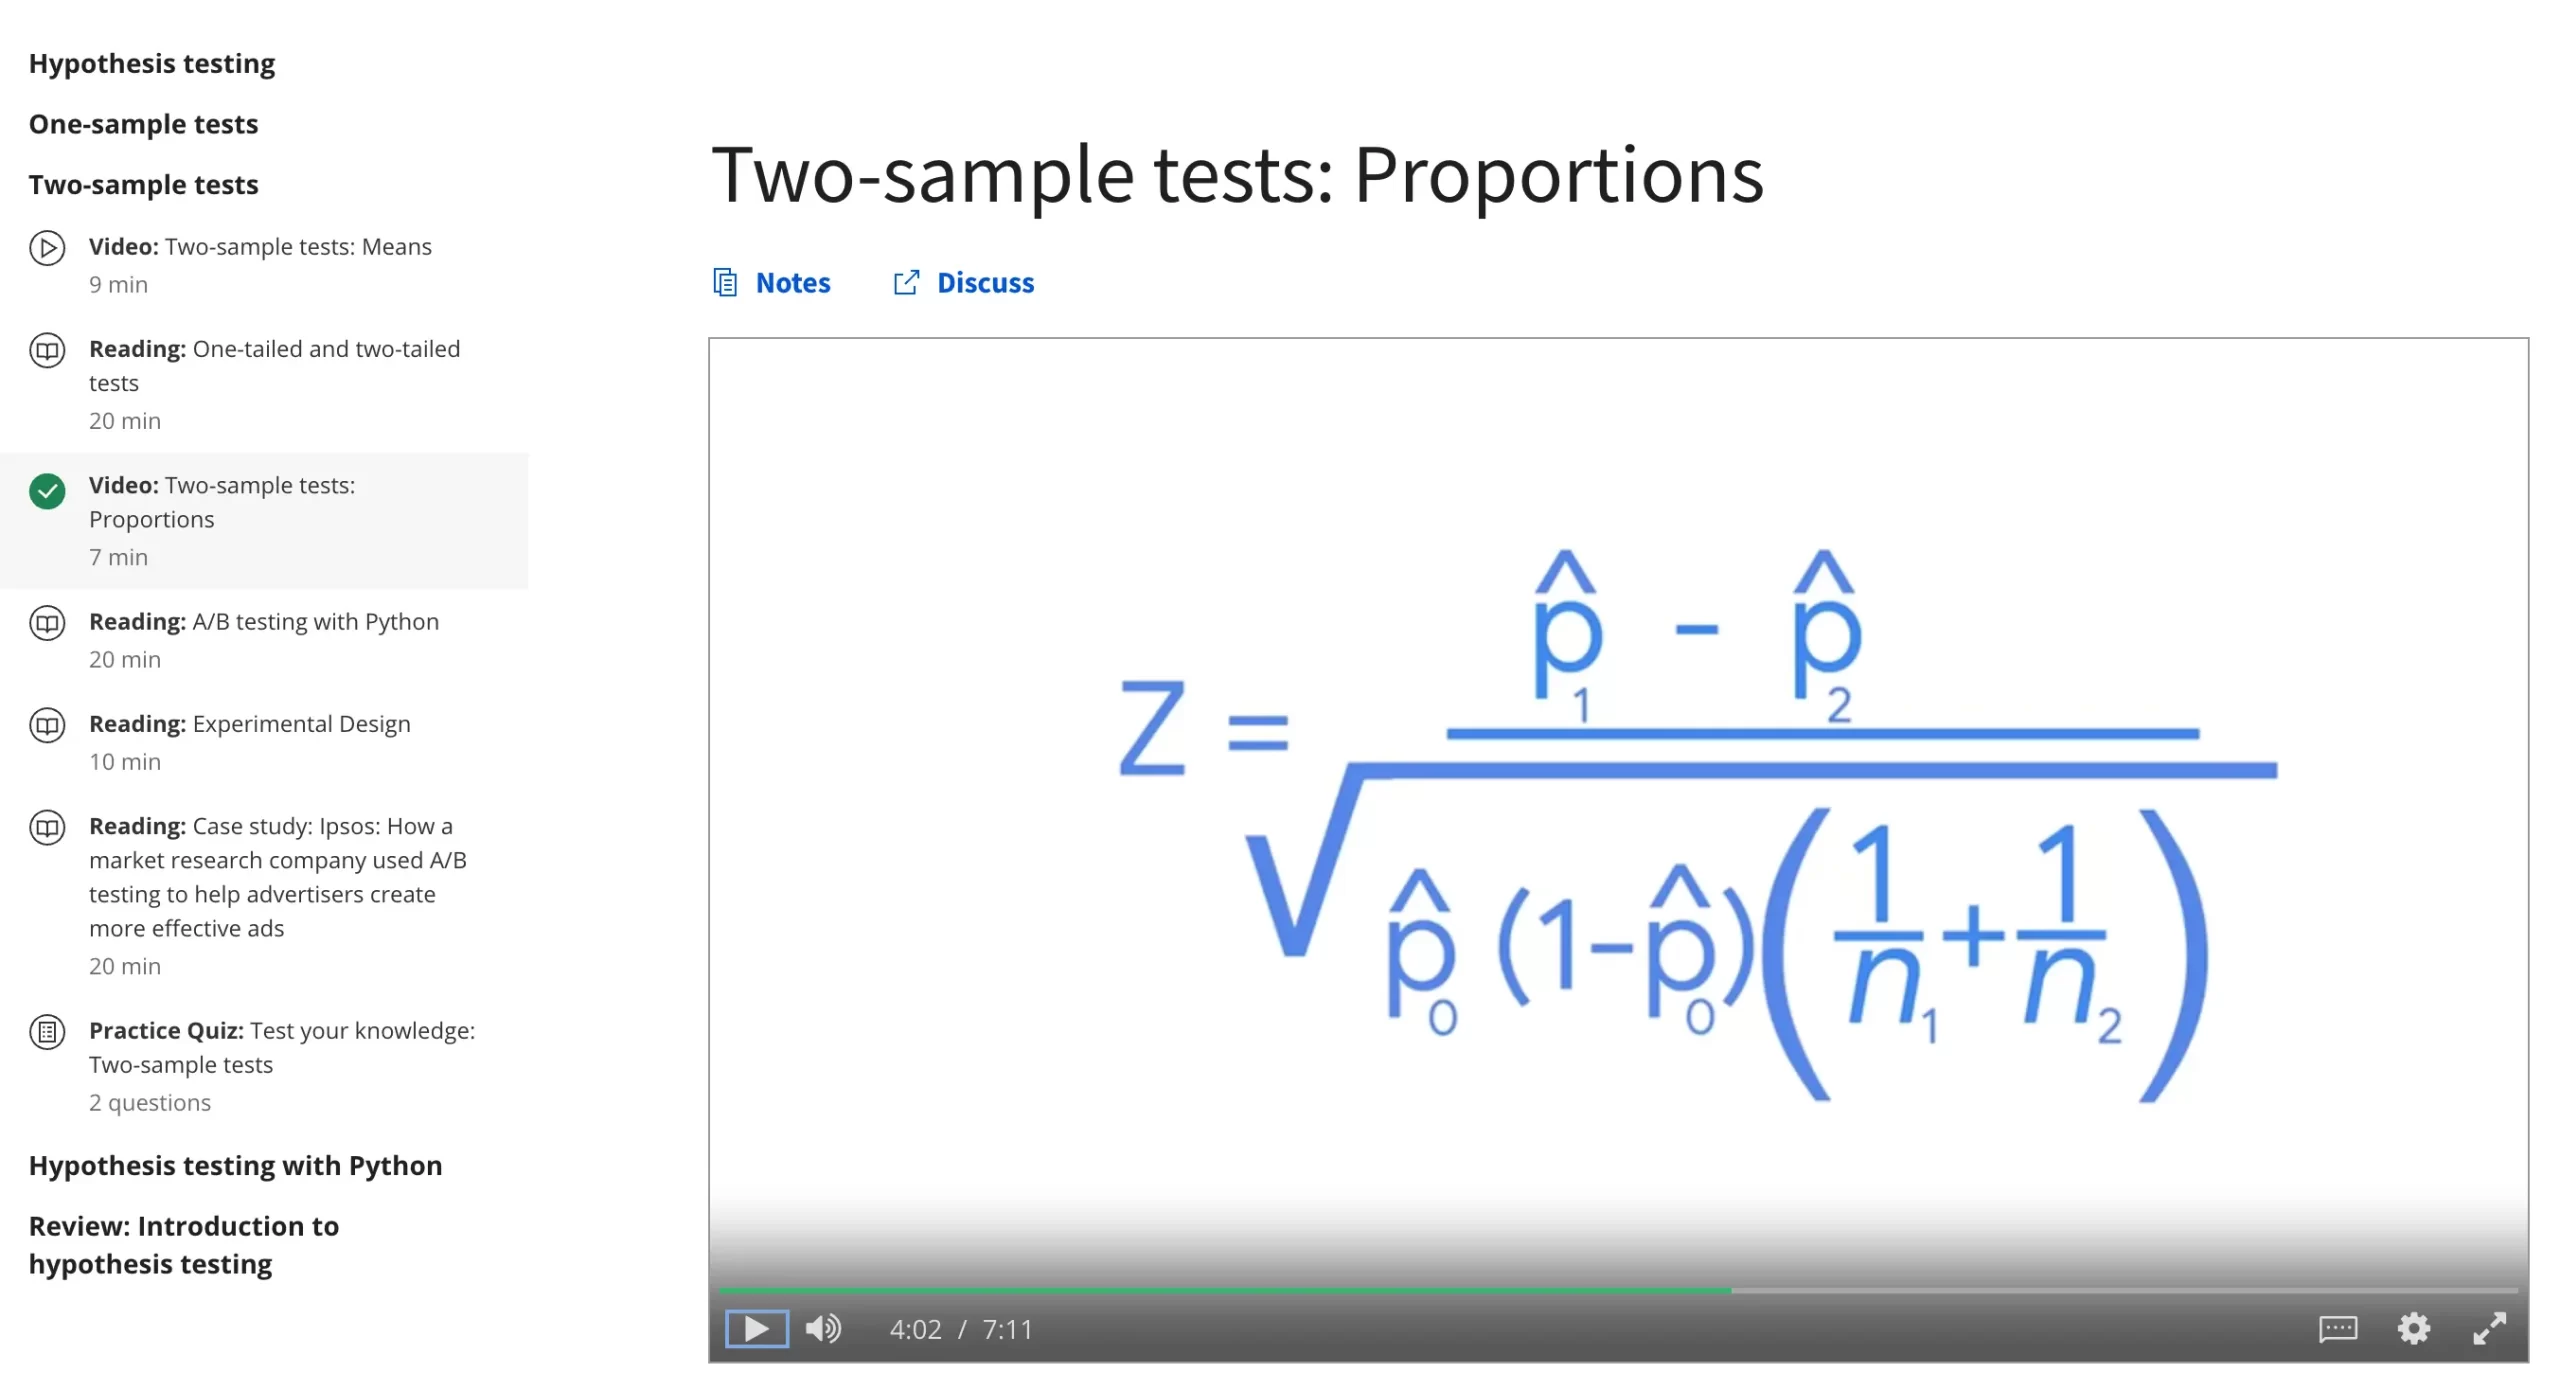 Two-sample tests: Proportions